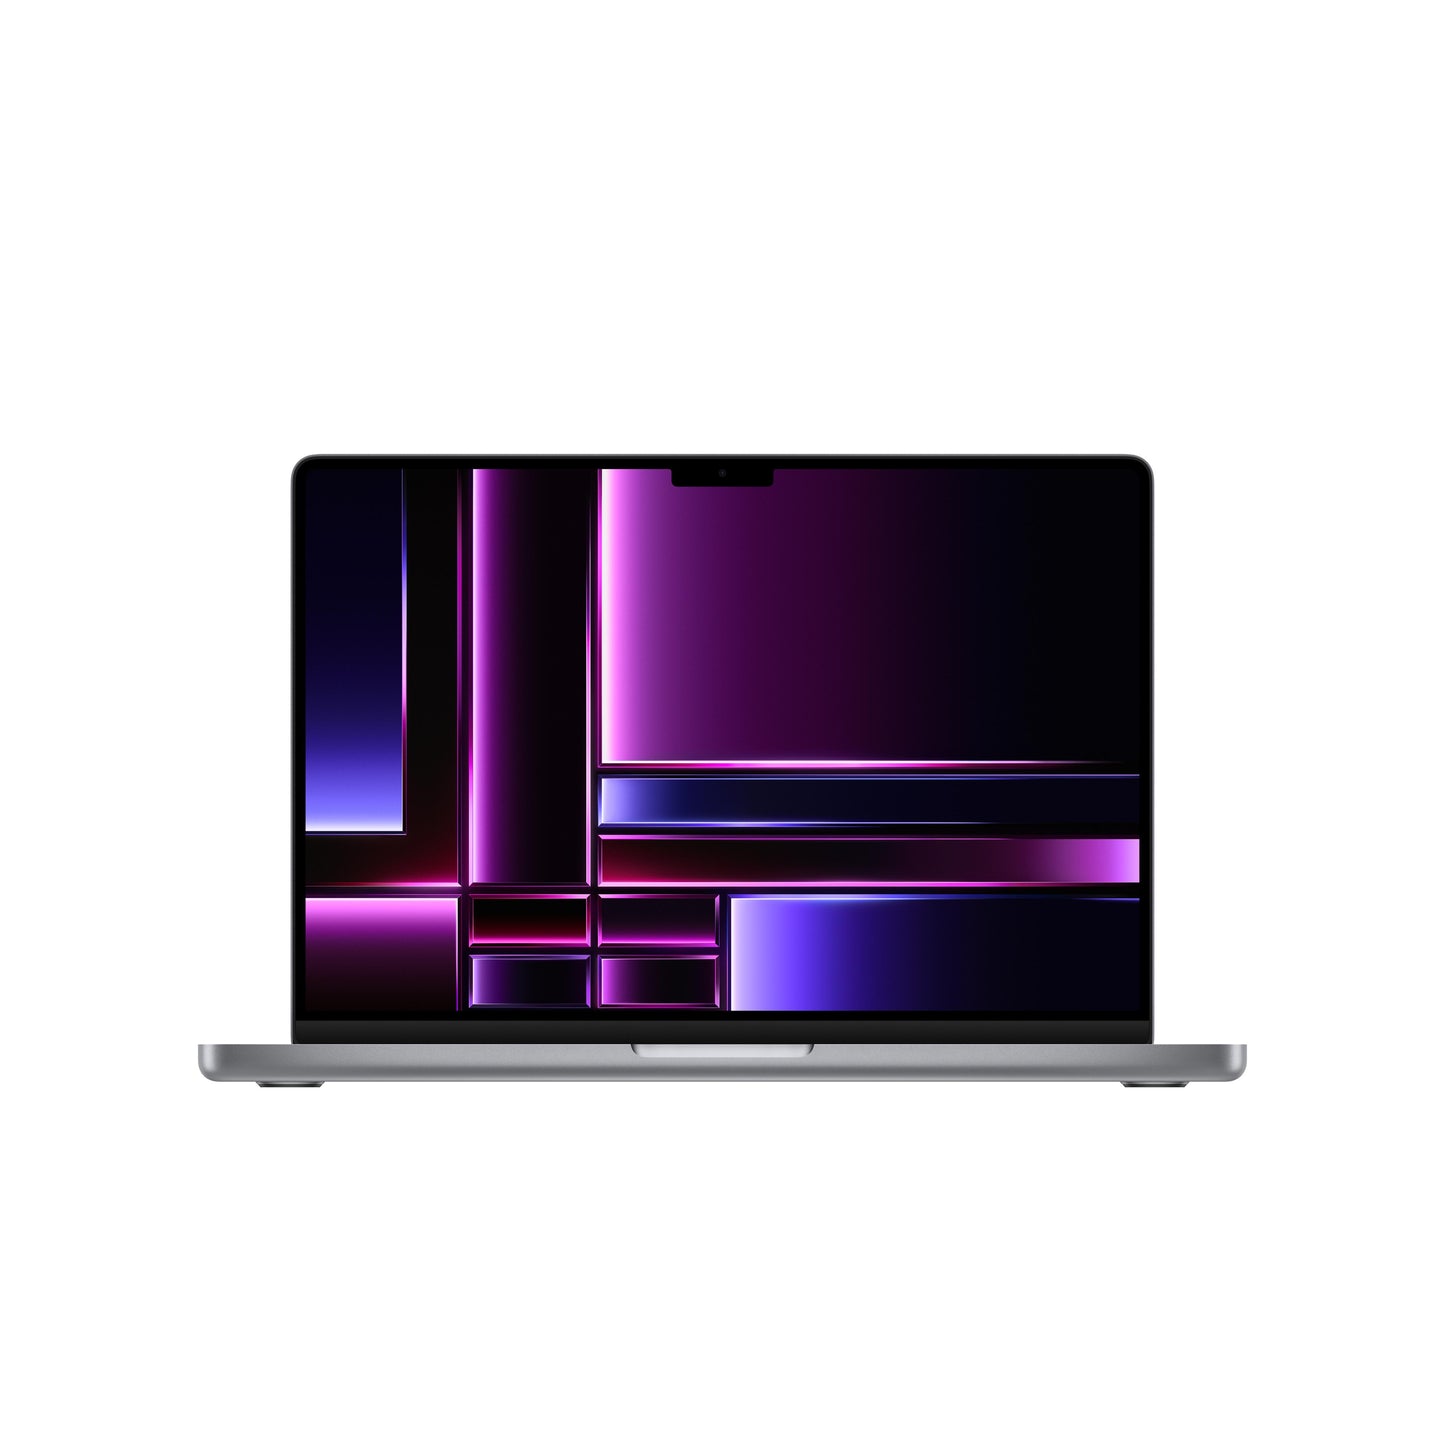 "14-inch MacBook Pro: Apple M2 Pro chip with 10-core CPU and 16-core GPU, 512GB SSD - Space Grey"